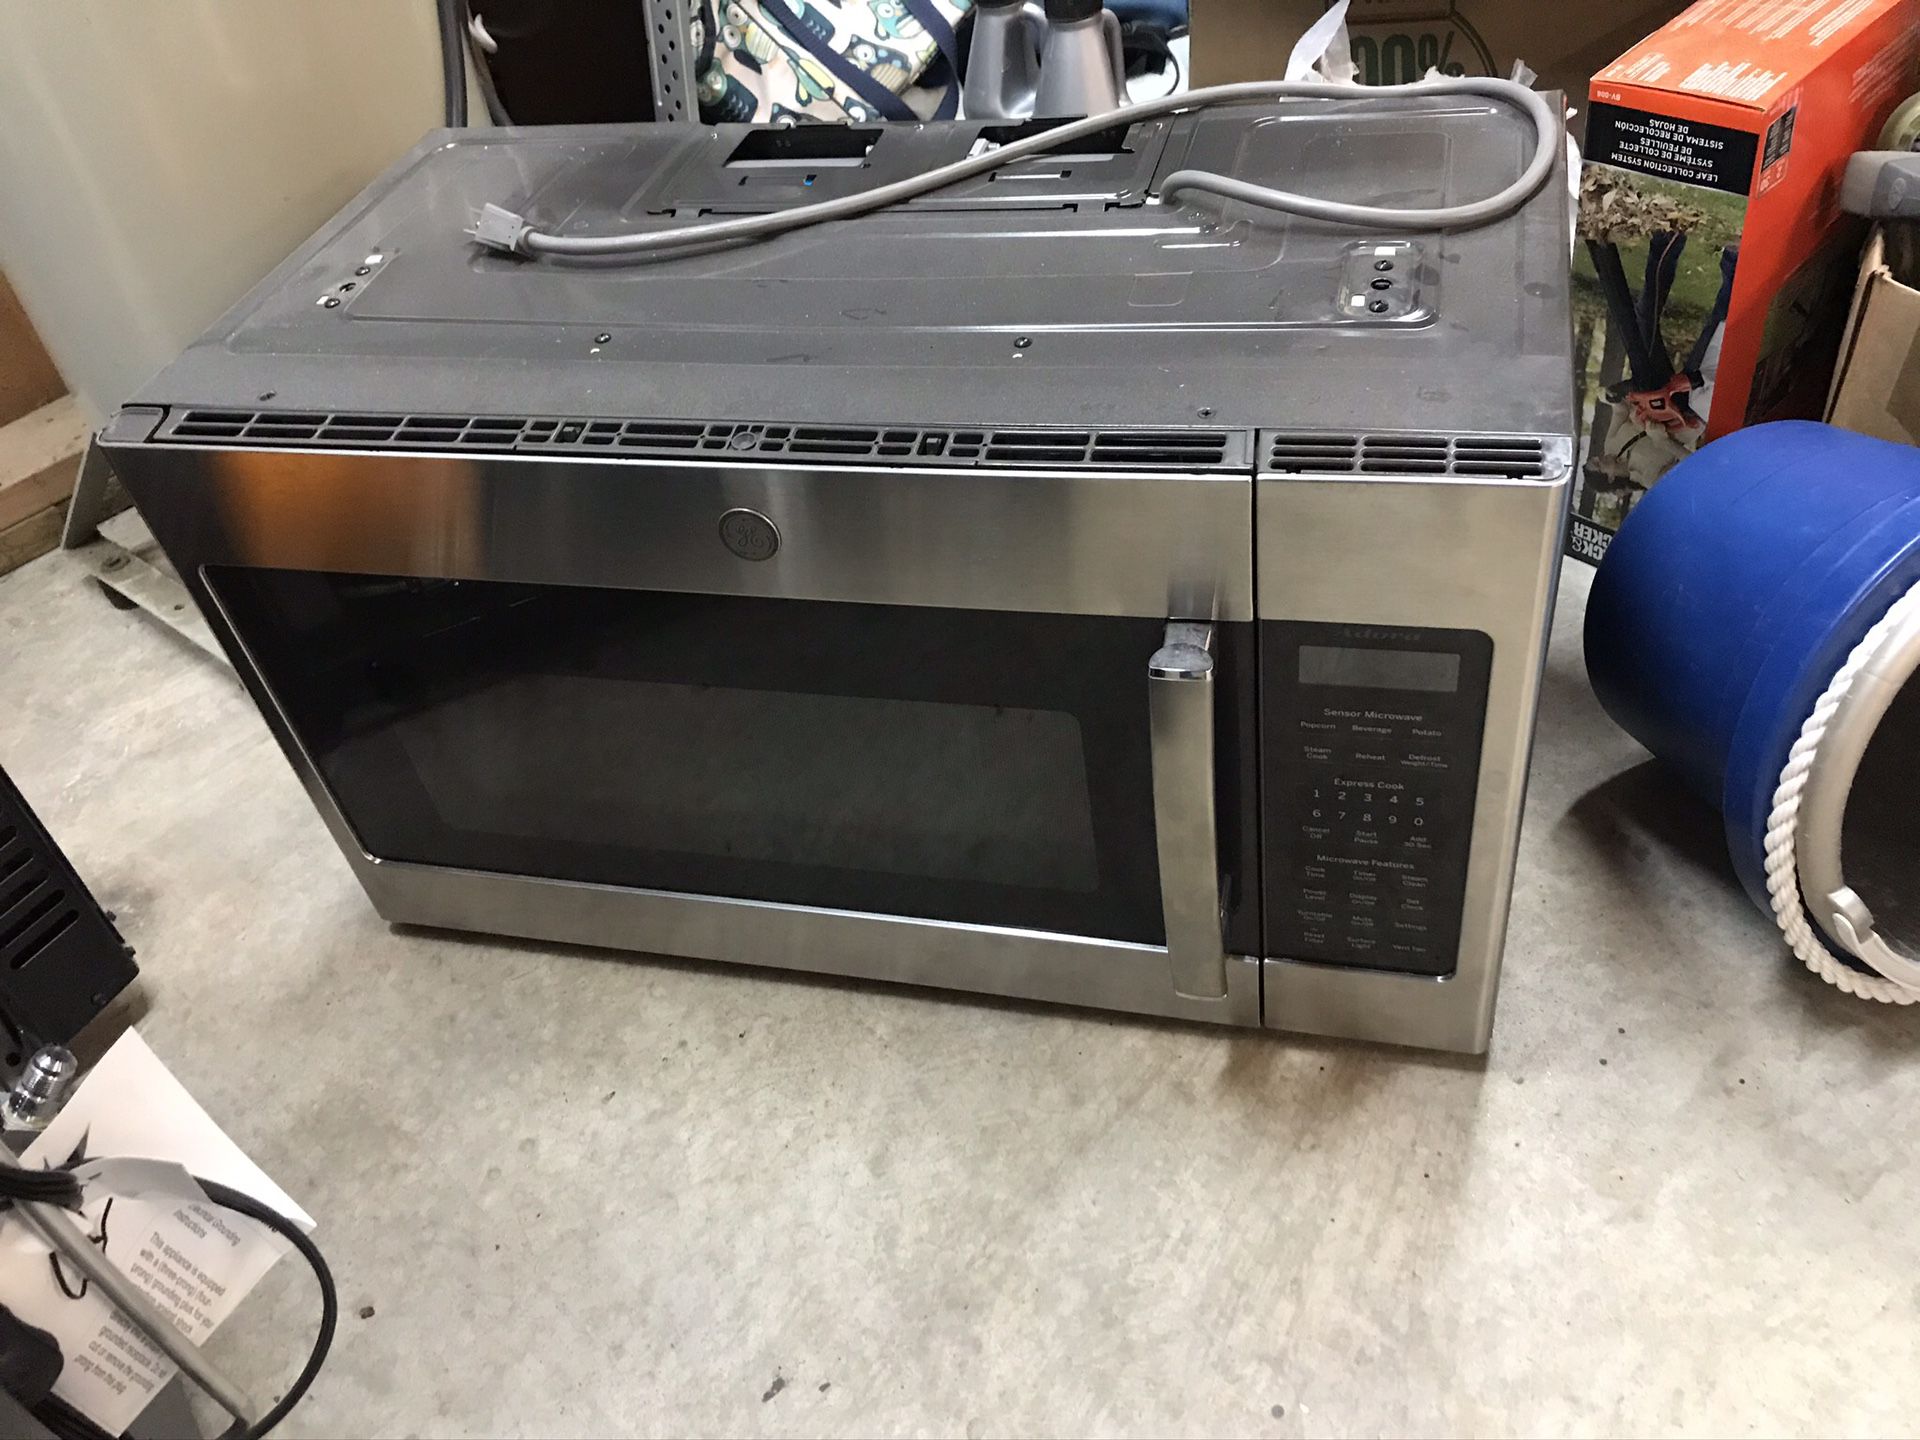 Gas range and microwave set, really good condition